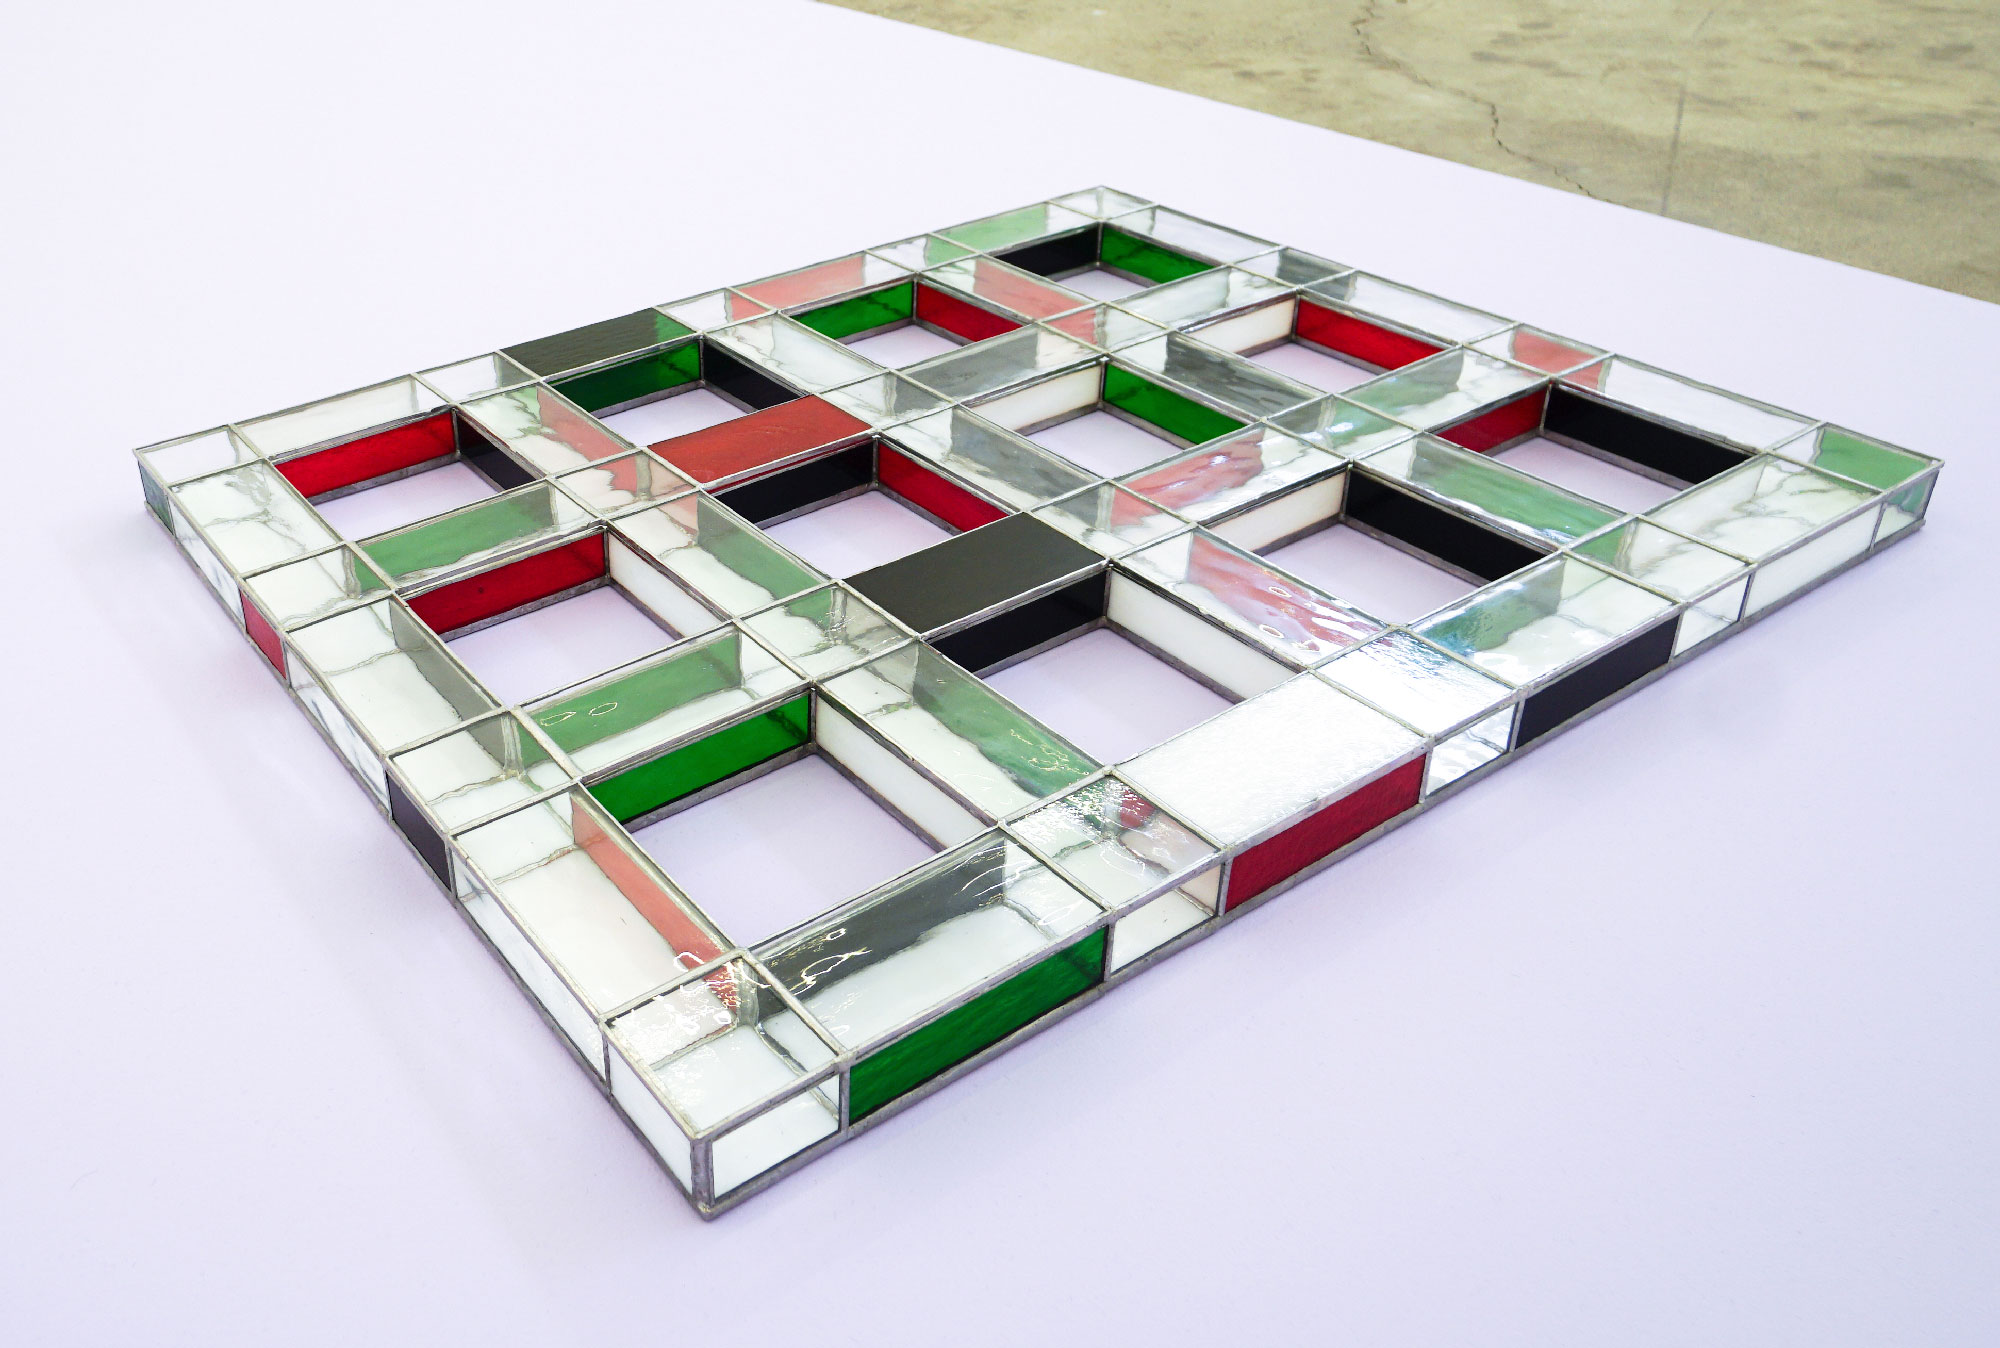 Red, green, white and clear stained-glass grid sculpture on lavender platform